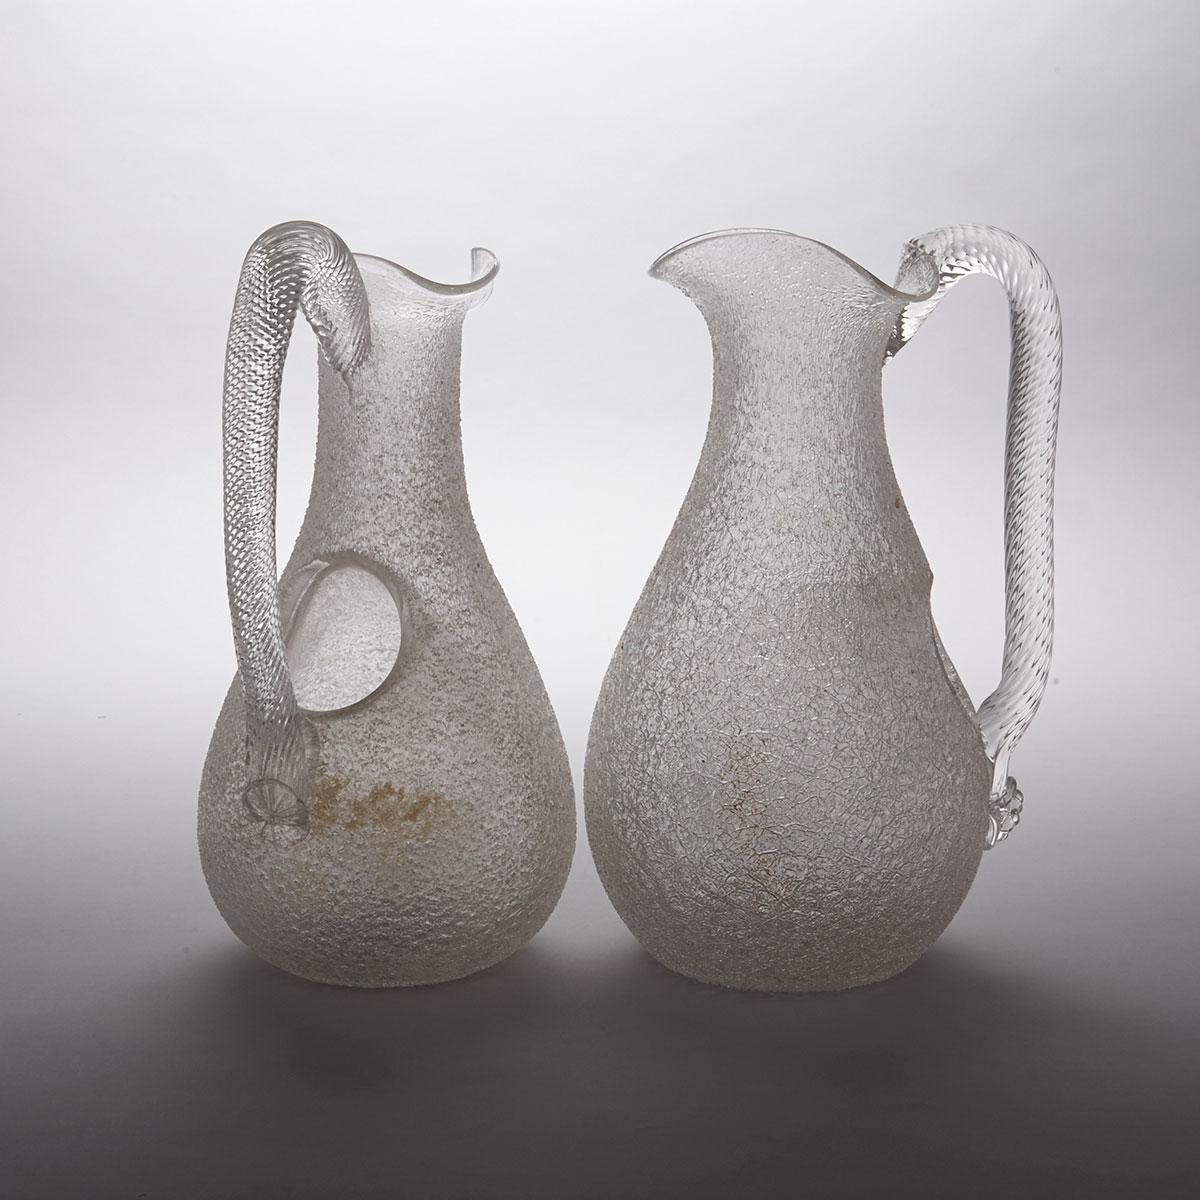 Pair of Victorian Overshot Glass Water Jugs, late 19th century